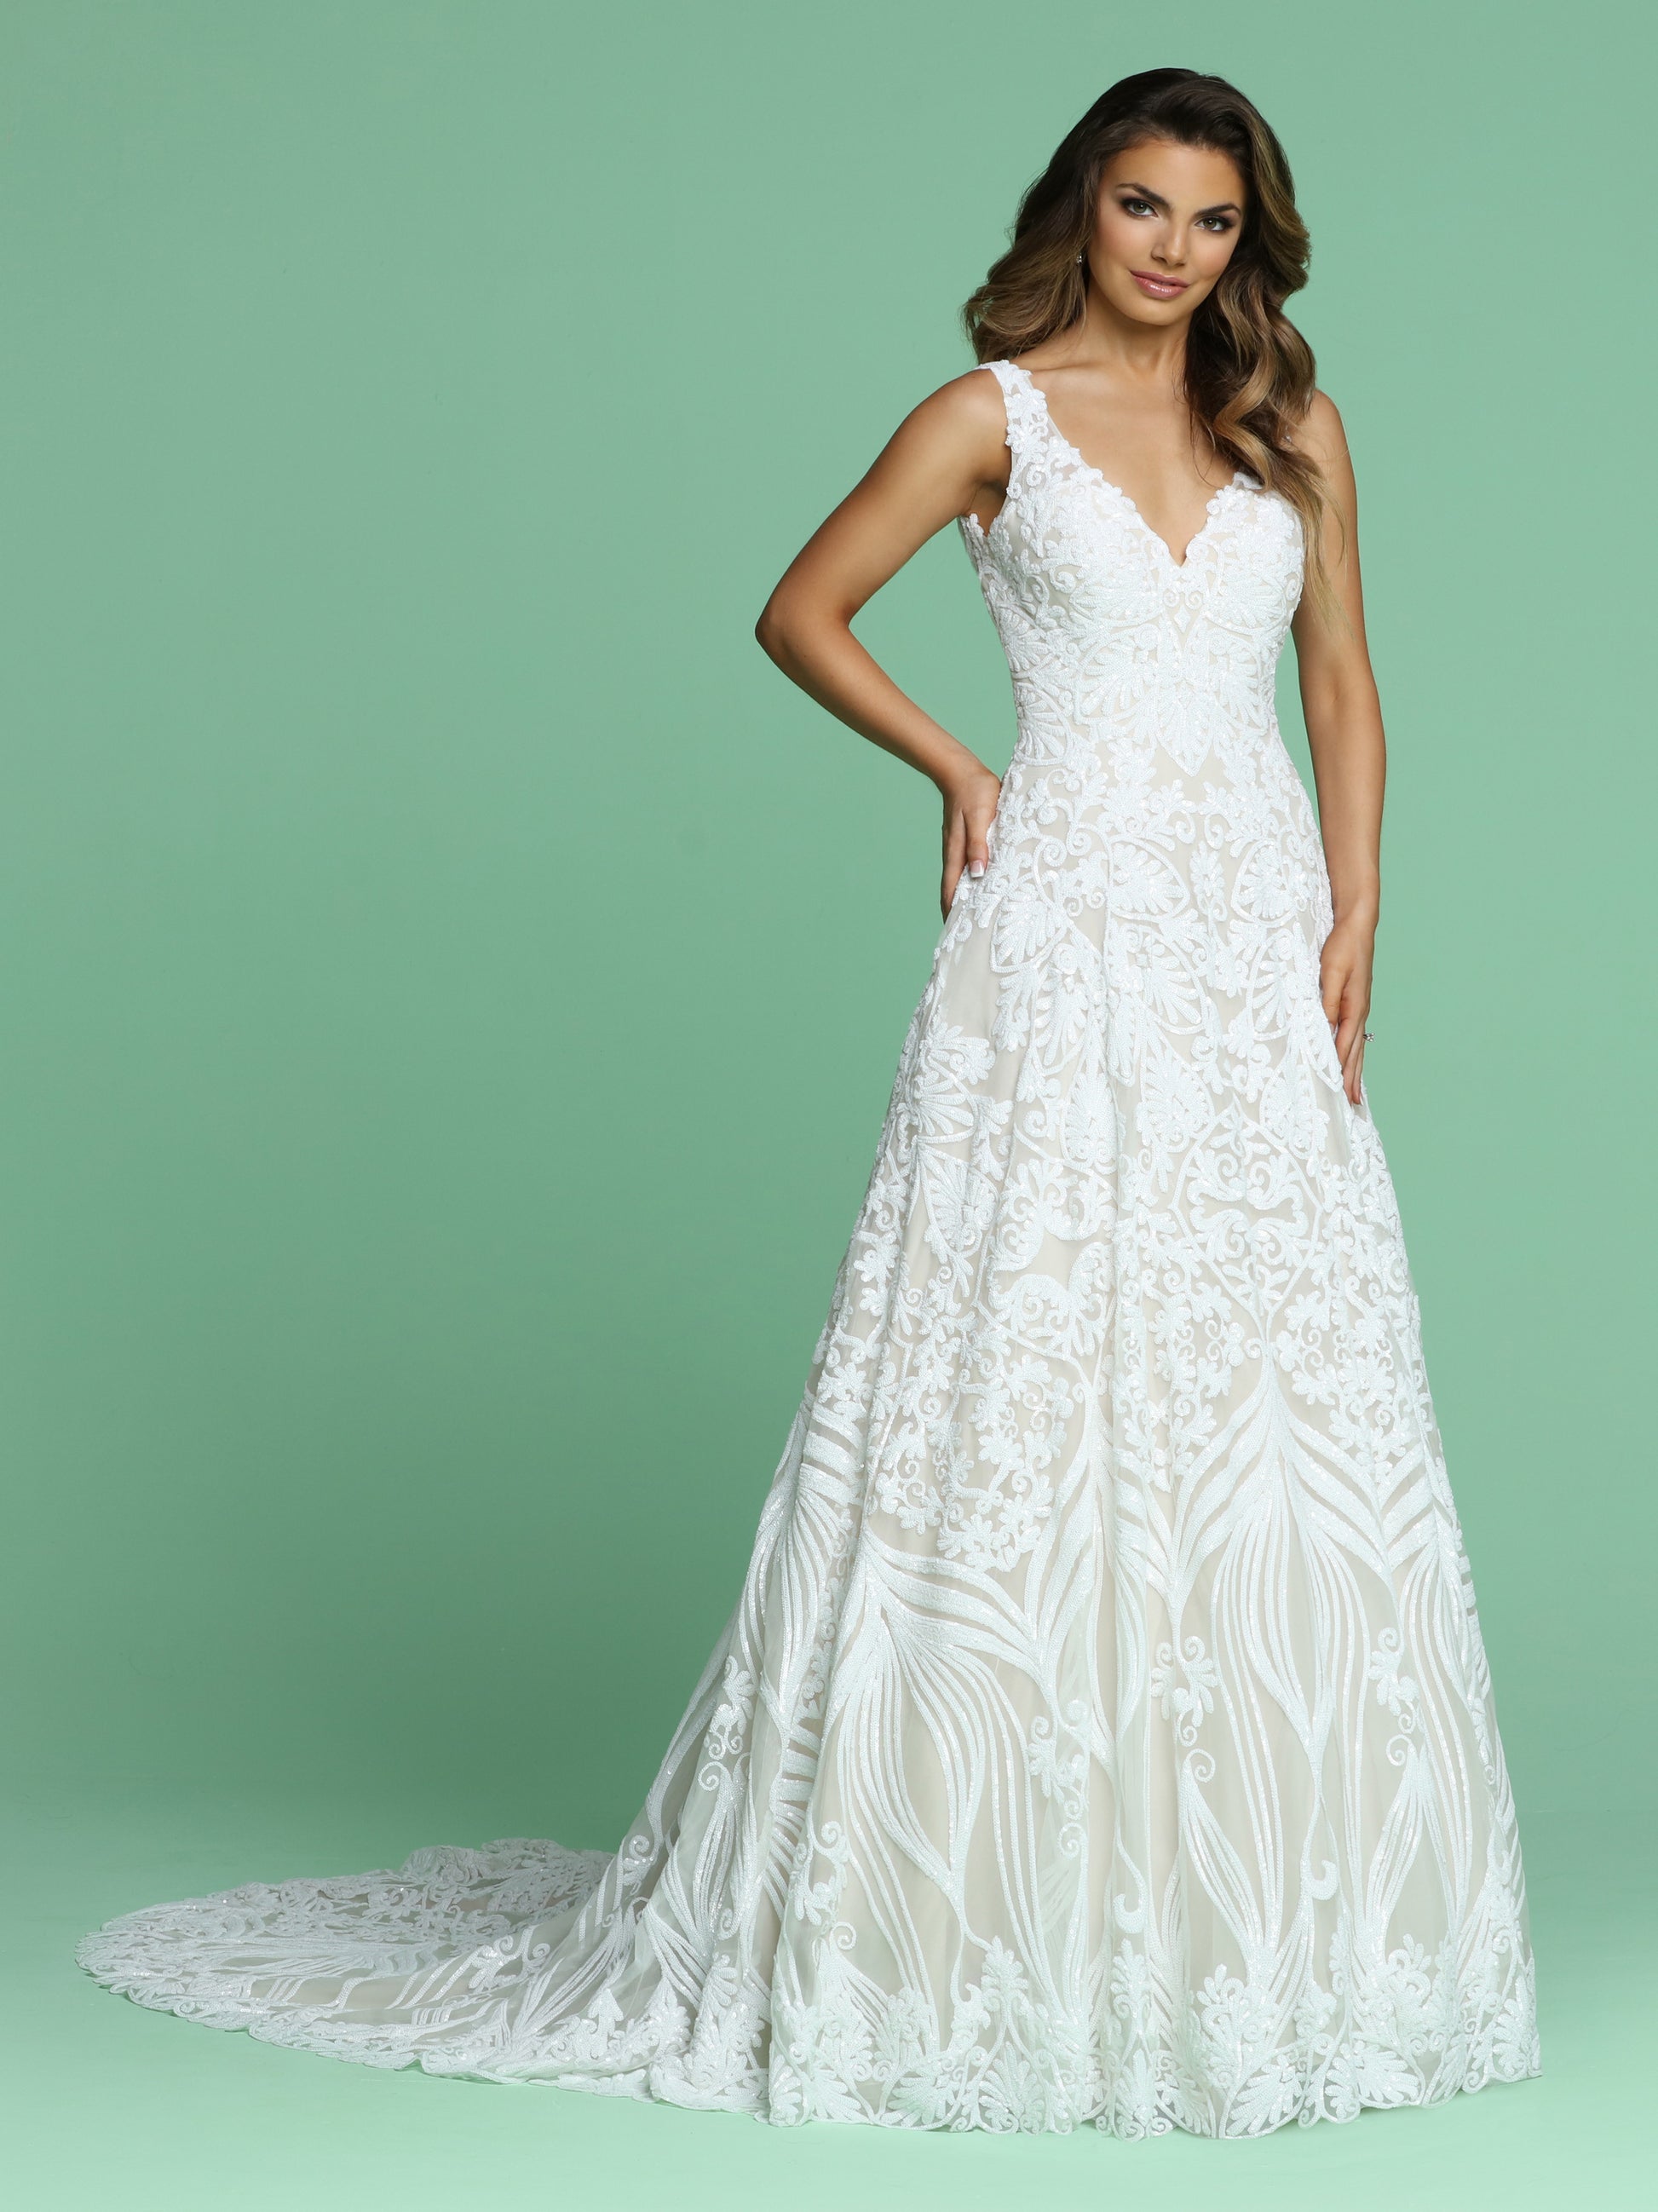 Davinci Bridal 50613 is a stunning long A Line Sequin Pattern Wedding Dress. Featuring a V Neckline with wide straps leading around to an open V back. This Shimmering gown is a true Fairytale Princess Gown!  Available for 1-2 Week Delivery!!!  Available Sizes: 2,4,6,8,10,12,14,16,18,20  Available Colors: Ivory/Blush, Ivory/Ivory  Available Sizes: 2-30  Available Colors: Ivory/Blush, Ivory/Ivory, White/White